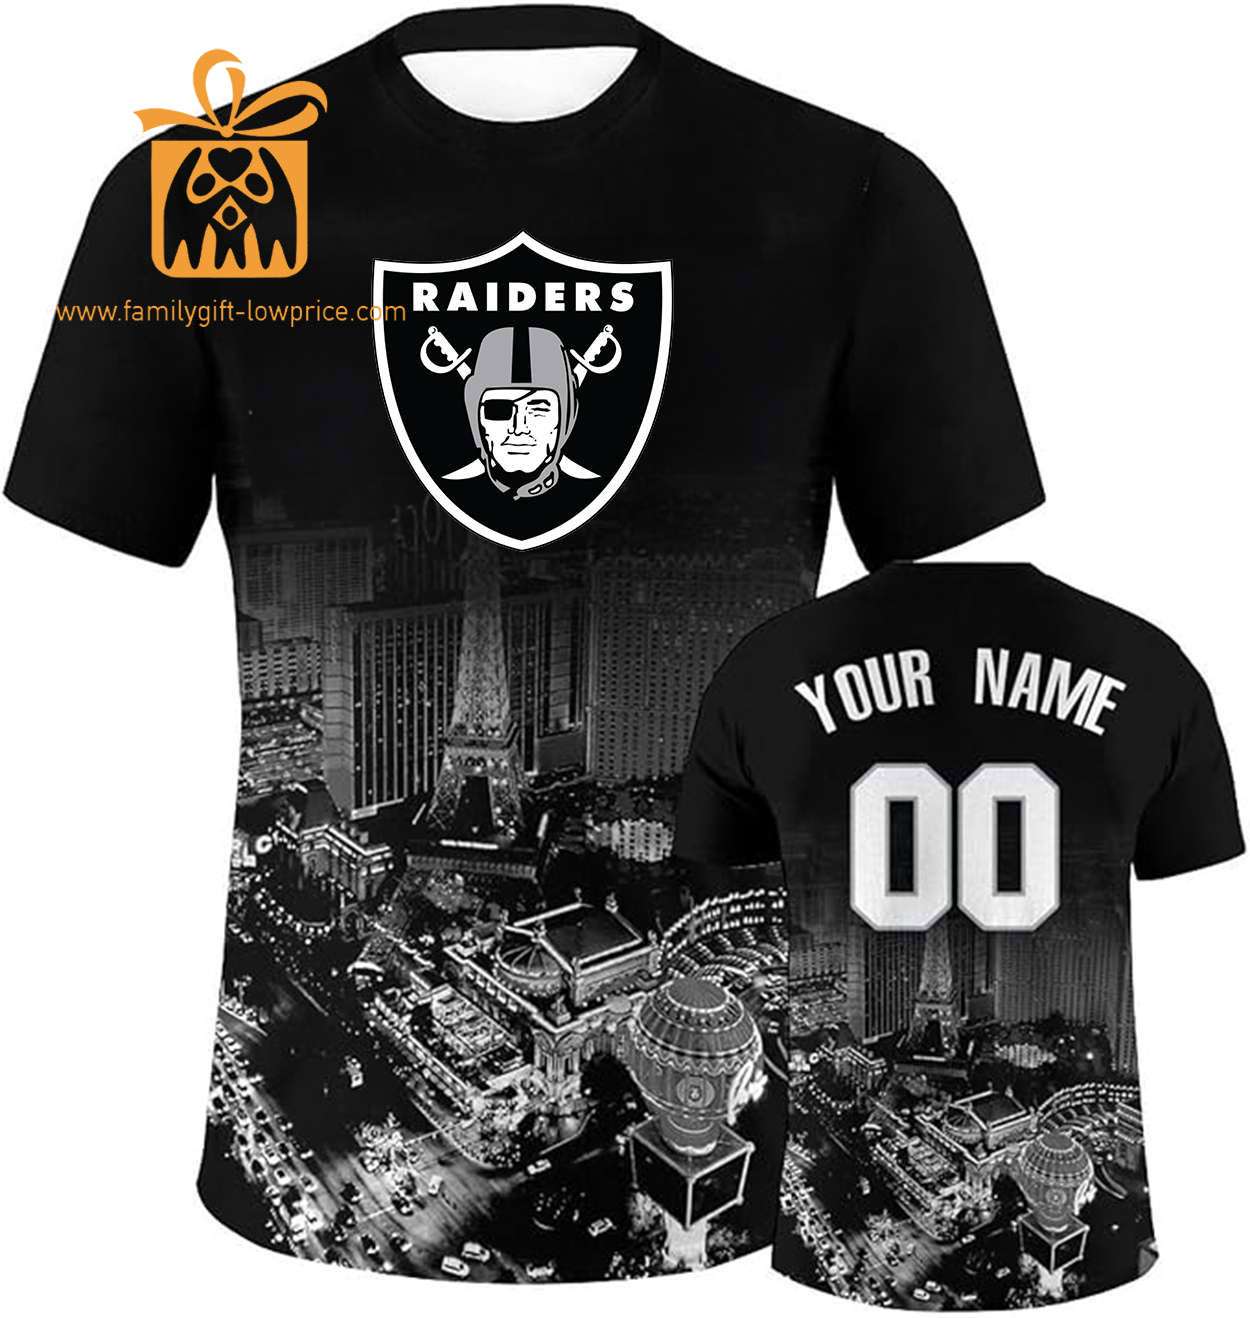 Las Vegas Raiders Custom Football Shirts – Personalized Name & Number, Ideal for Fans